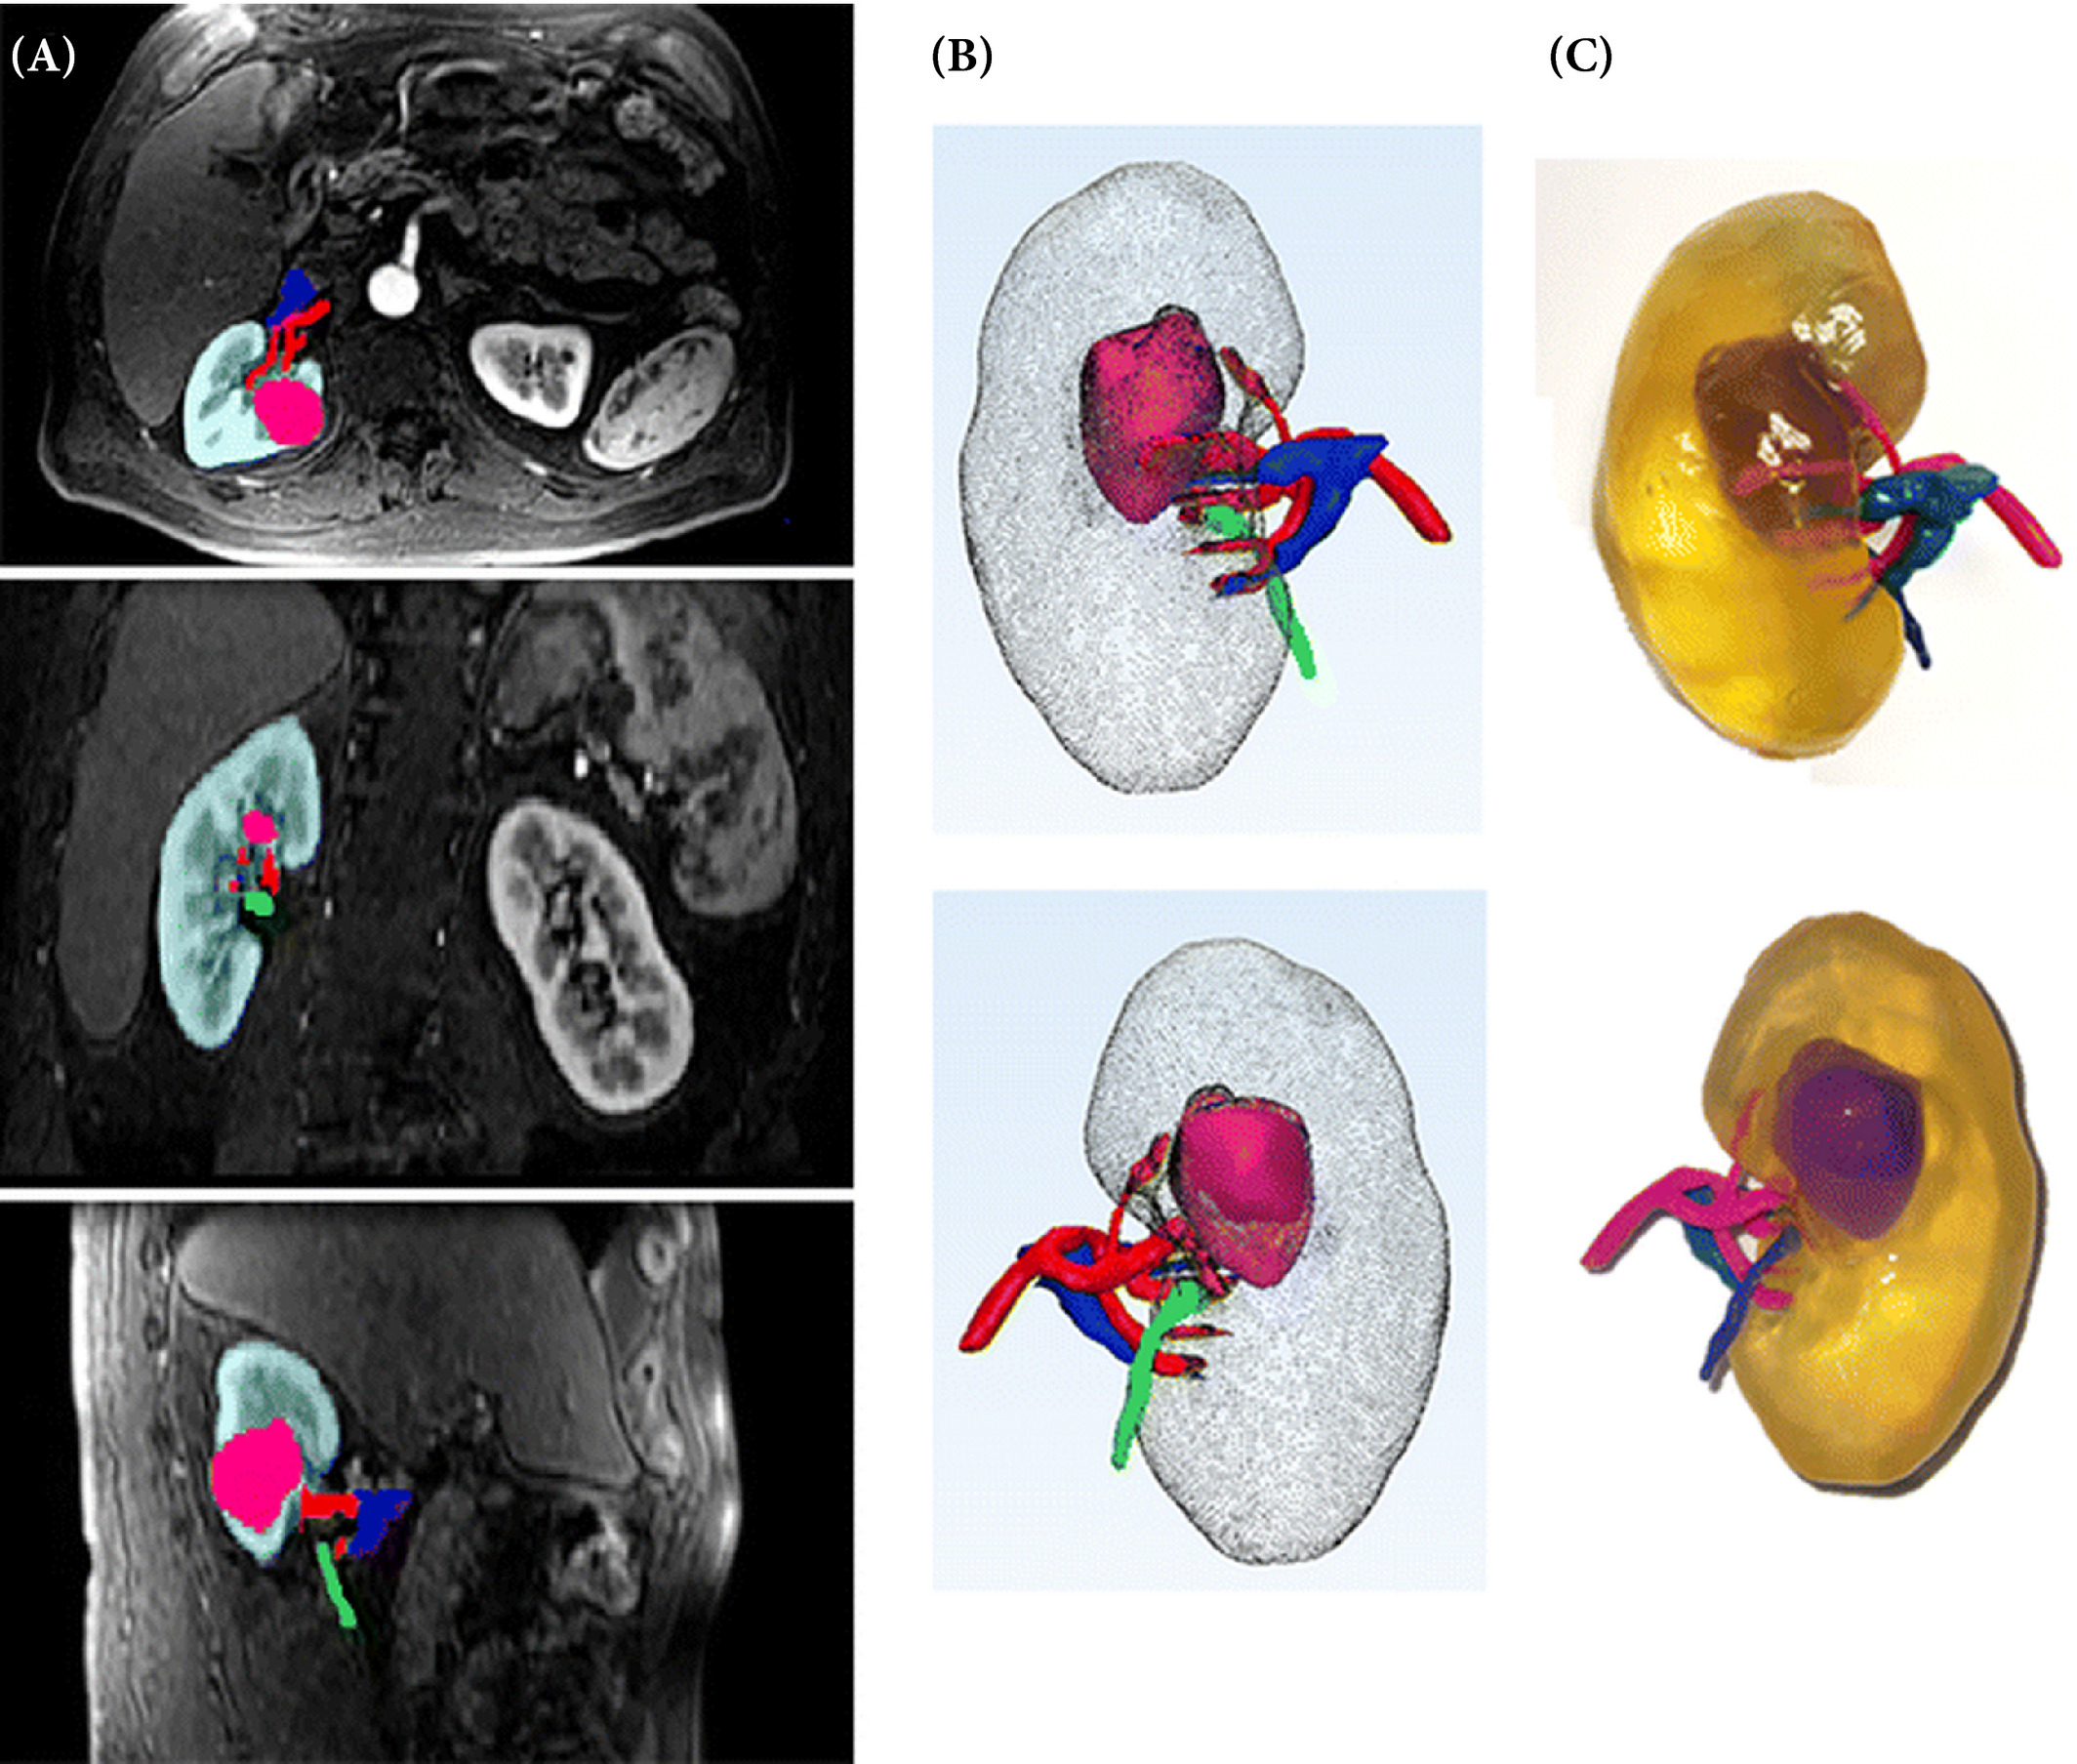 From MRI scan (A) to digital model (B) to physical 3D printed model (C). Image via Wake N et al.